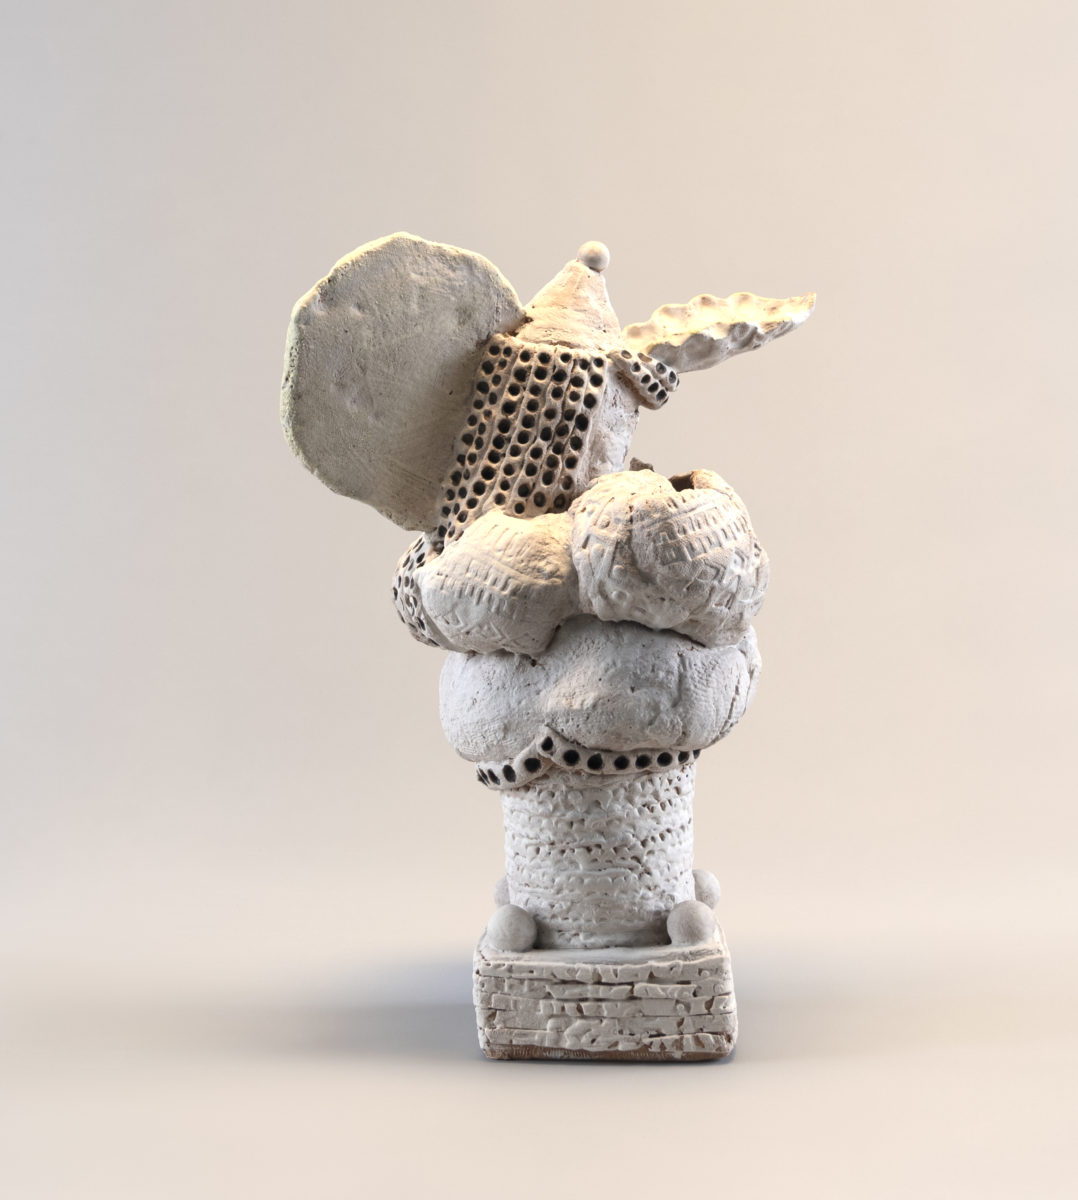 don't rely on magic 2022 | ronniecay | Ceramic sculpture | 44 cm | $2000